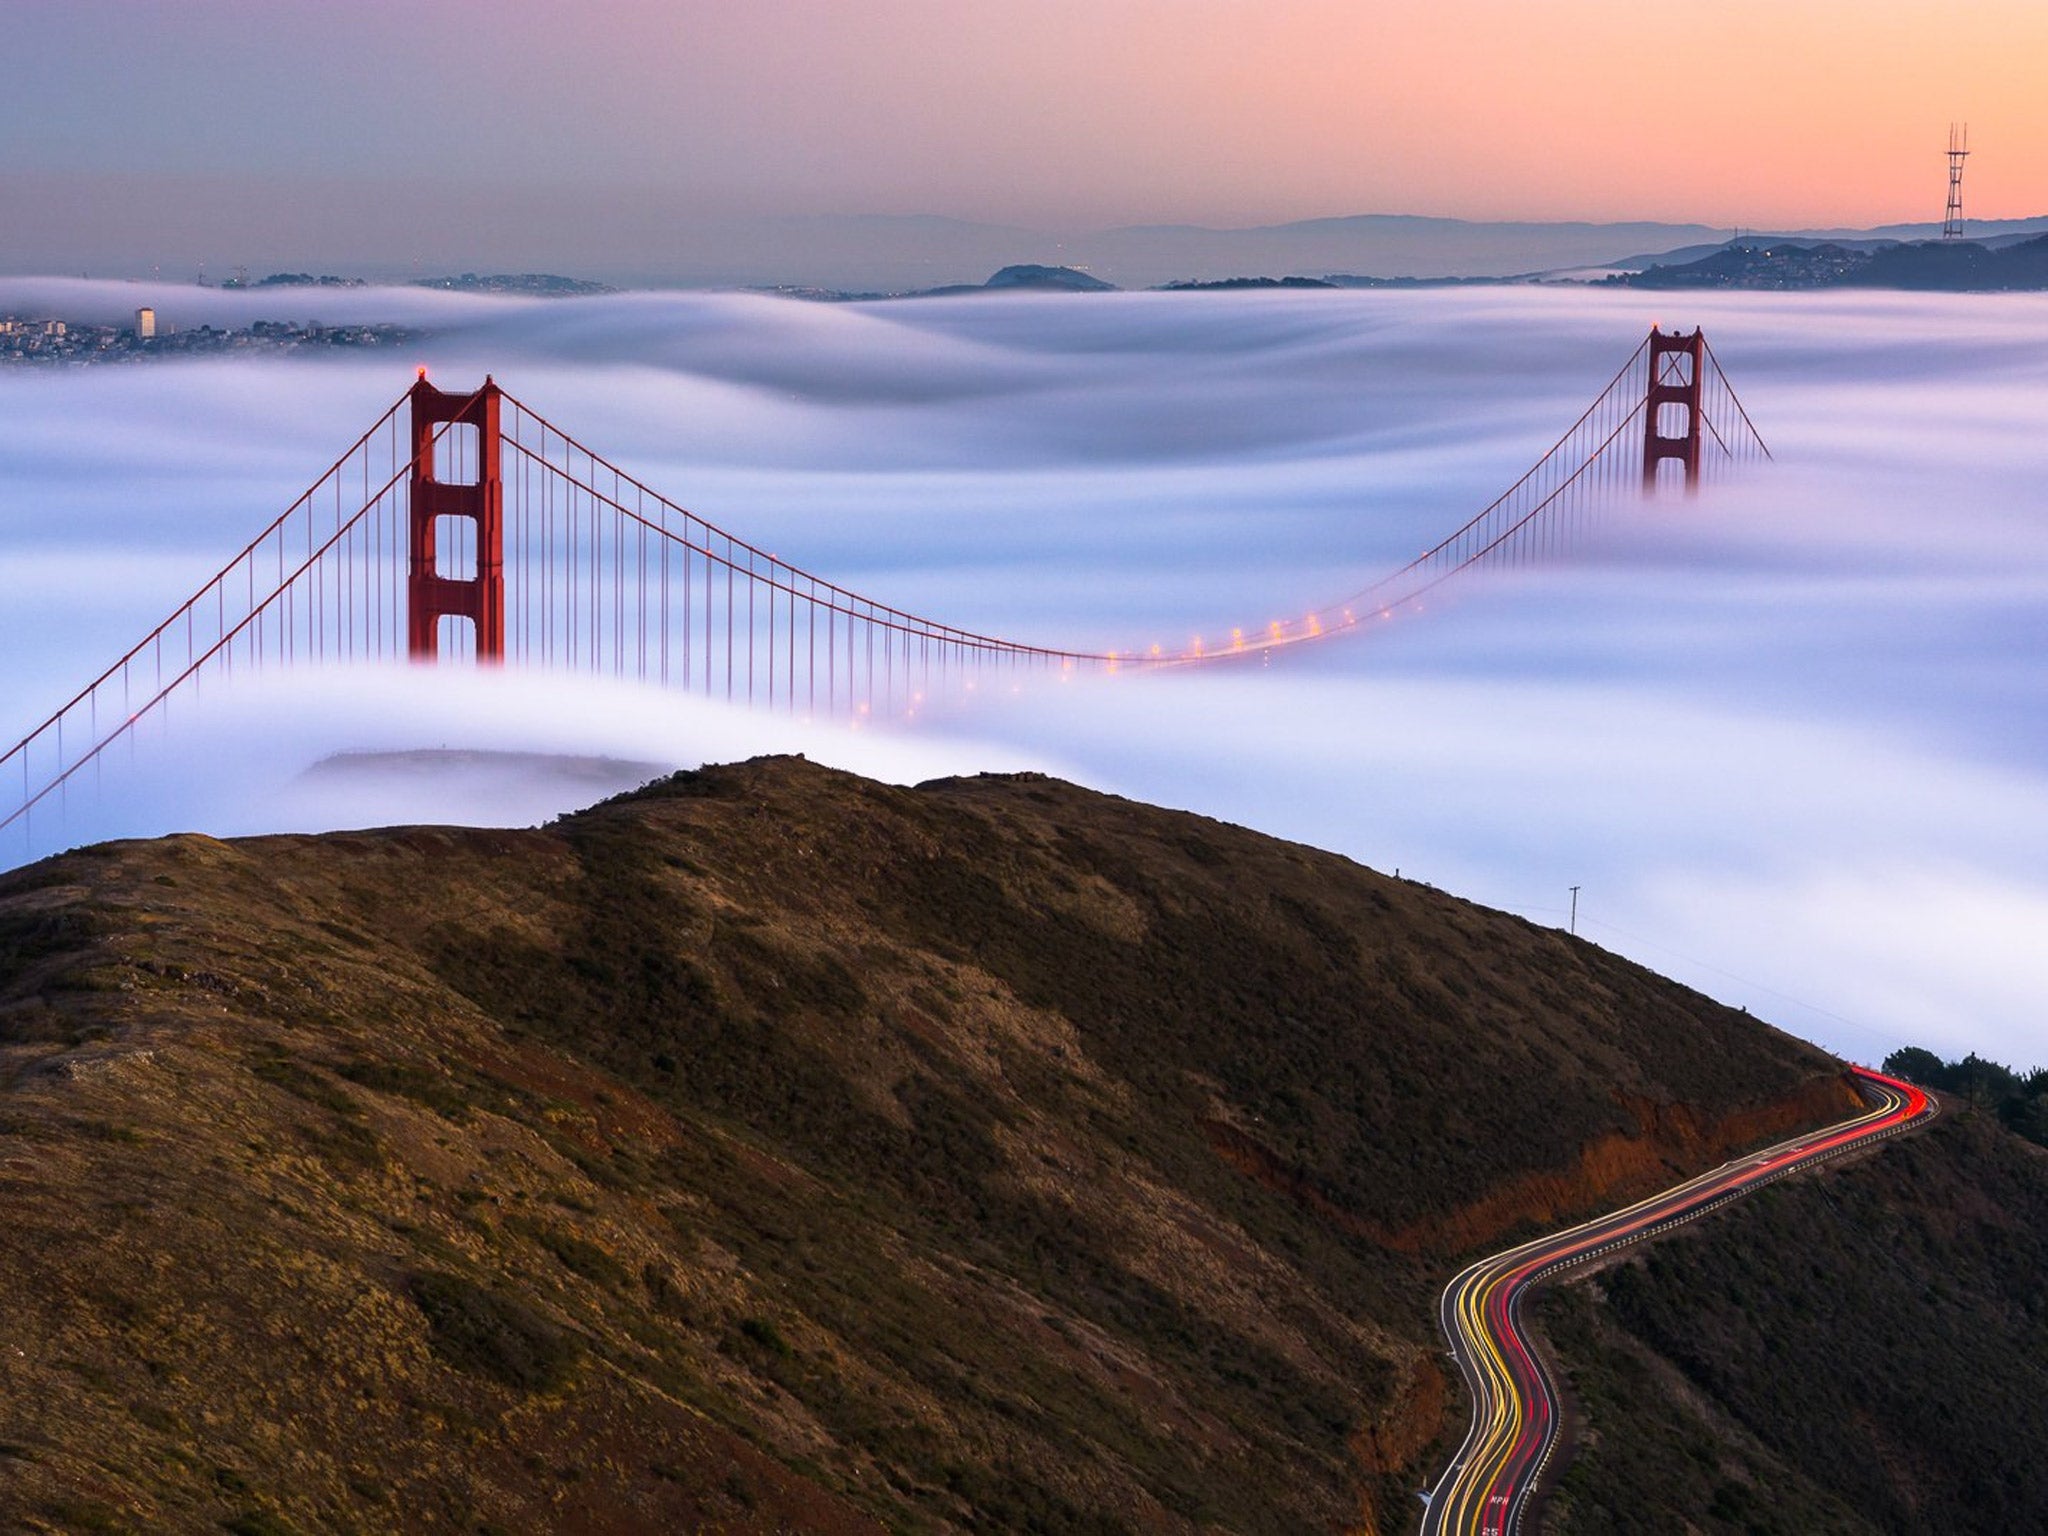 A Love Mysterious: The sun sets as the majestic fog of the Pacific coast glides under the iconic Golden Gate Bridge. The long exposure of the fog reveals a silky texture as the low clouds rise and fall over San Francisco's trademark hills. All the while,